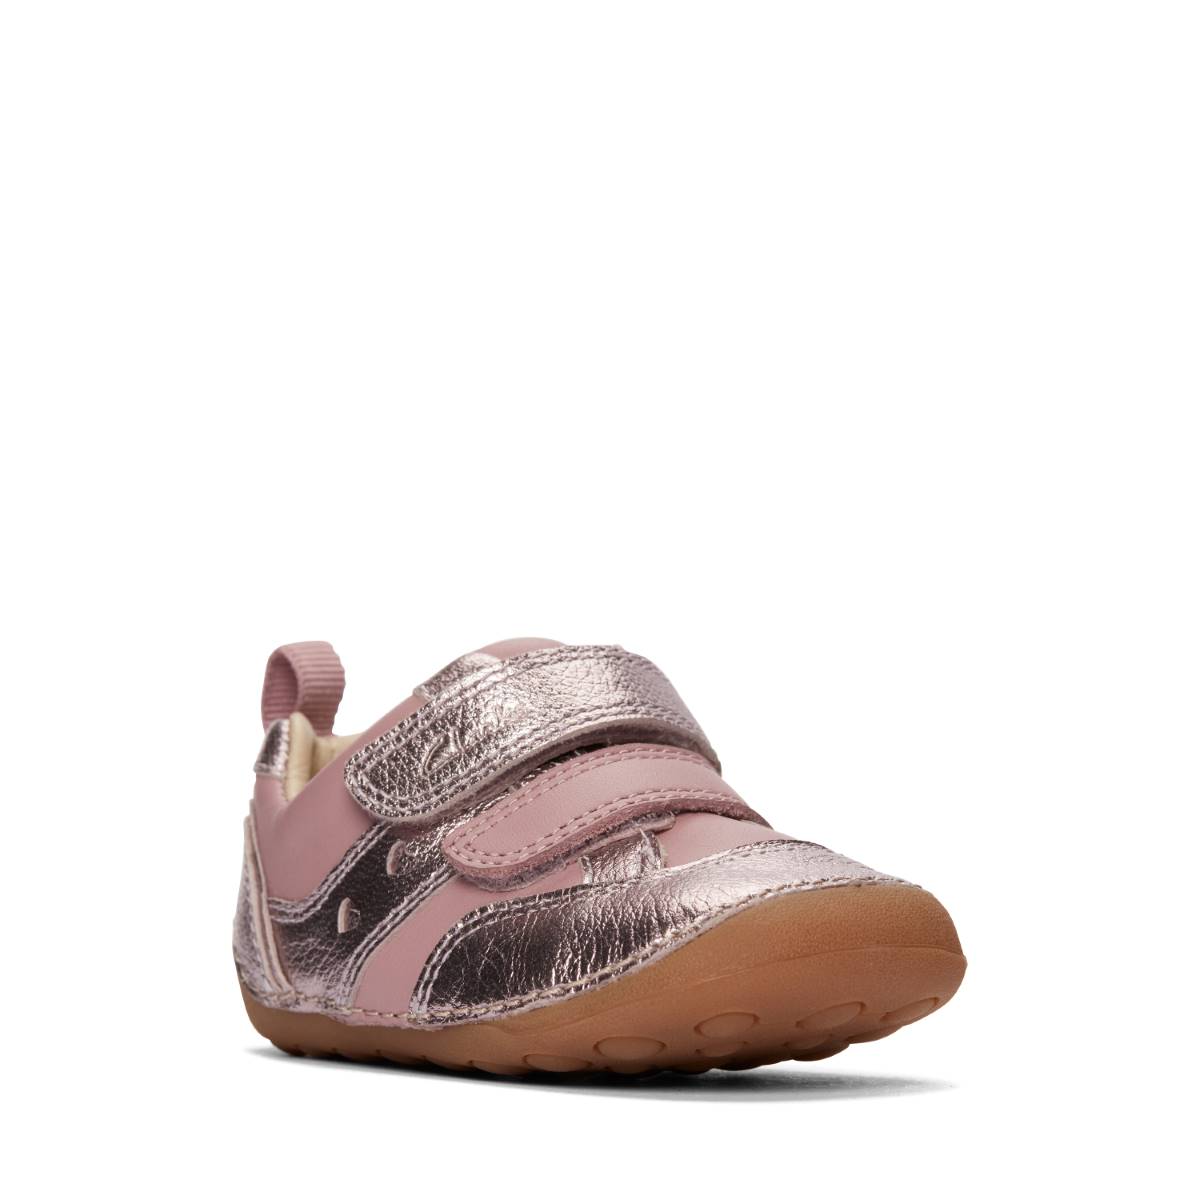 Clarks Tiny Sky T Blush Pink Kids girls first and baby shoes 7528-17G in a Plain Leather in Size 2.5